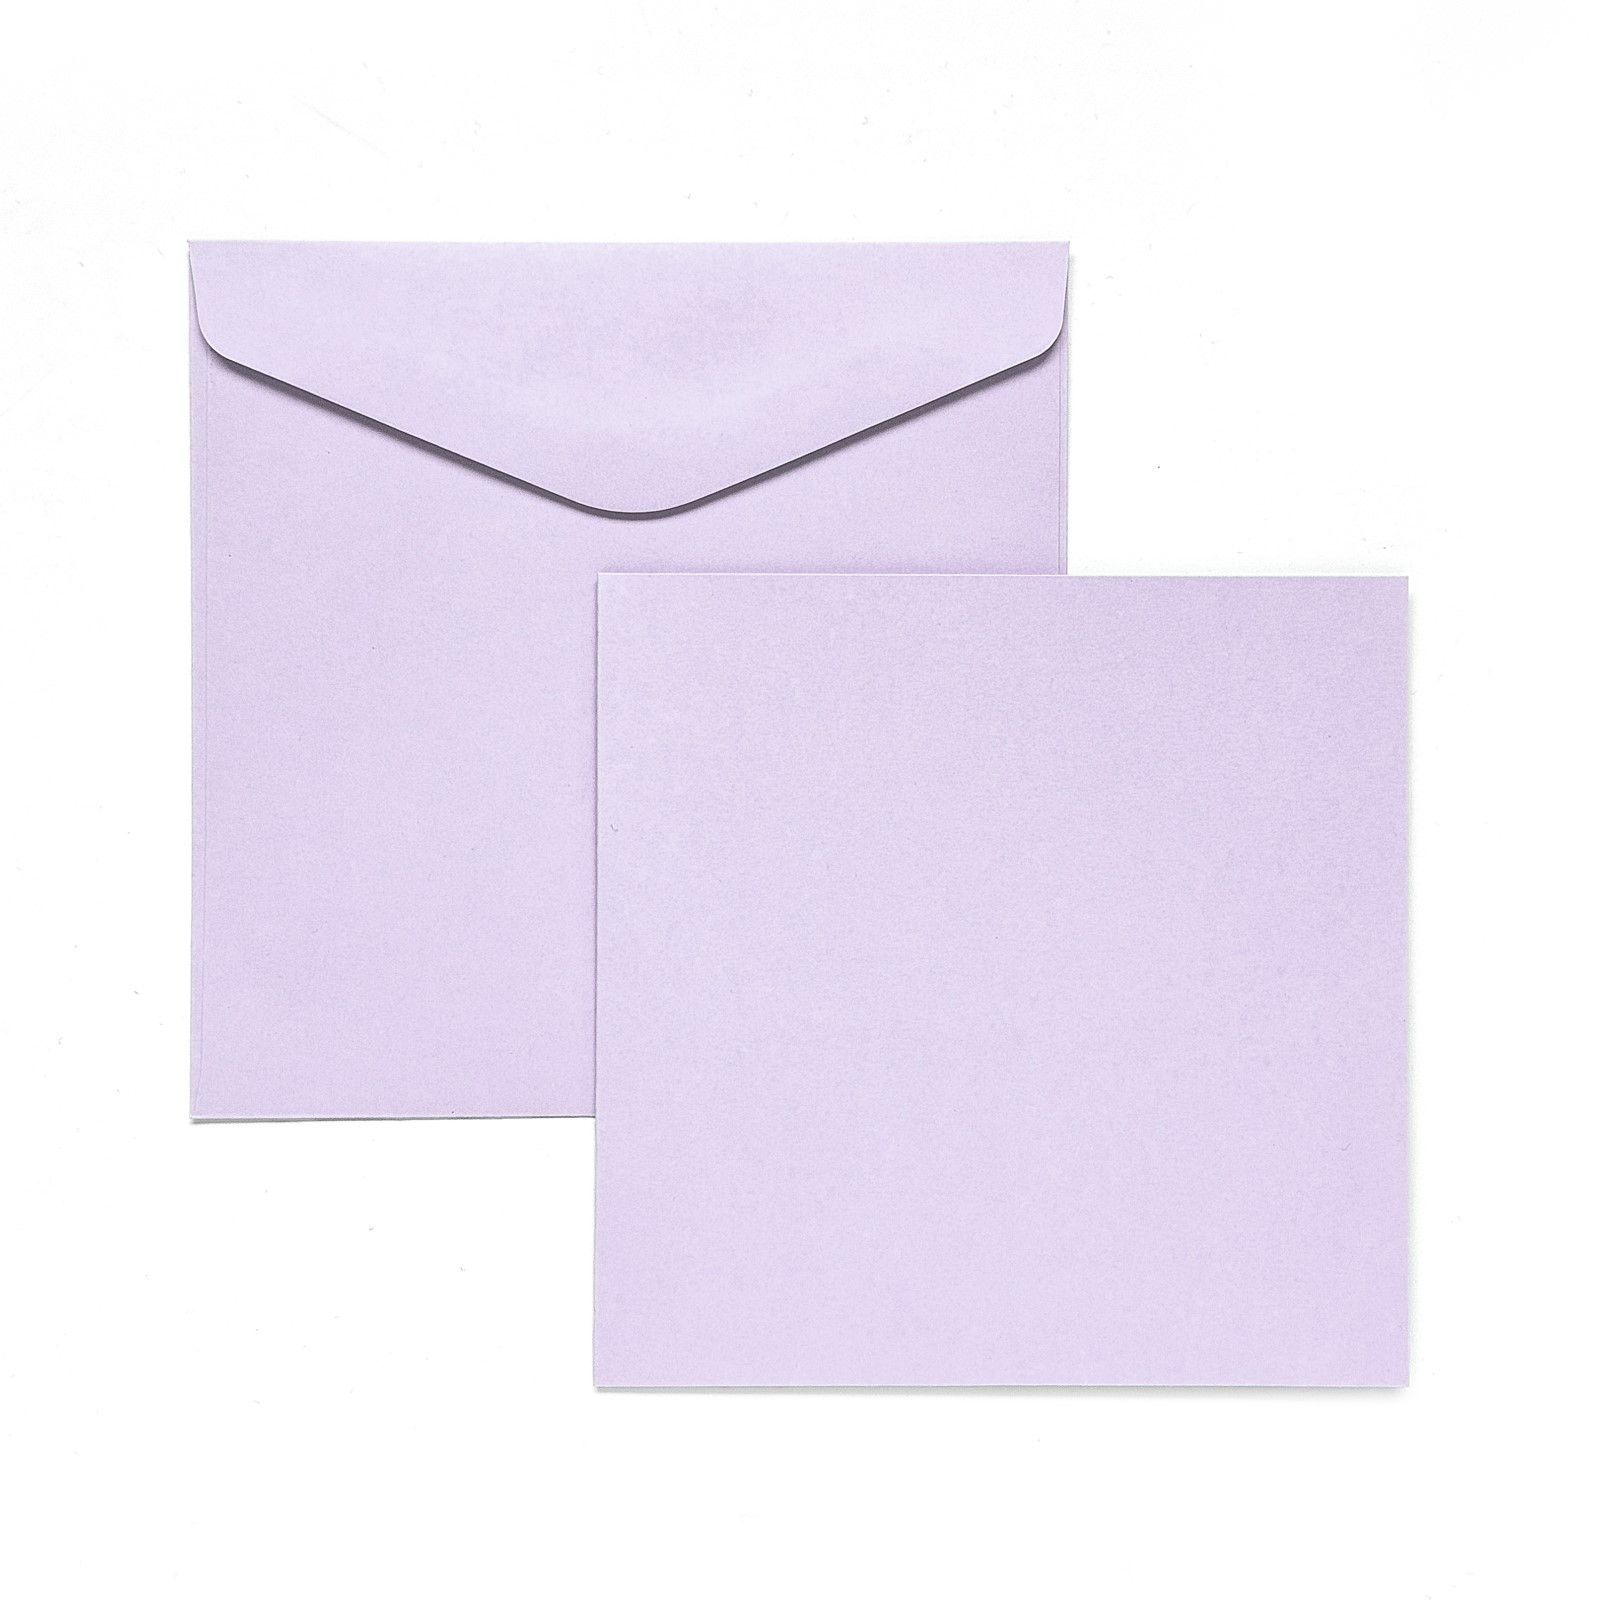 Card base145x145 for creation of invitations lavender